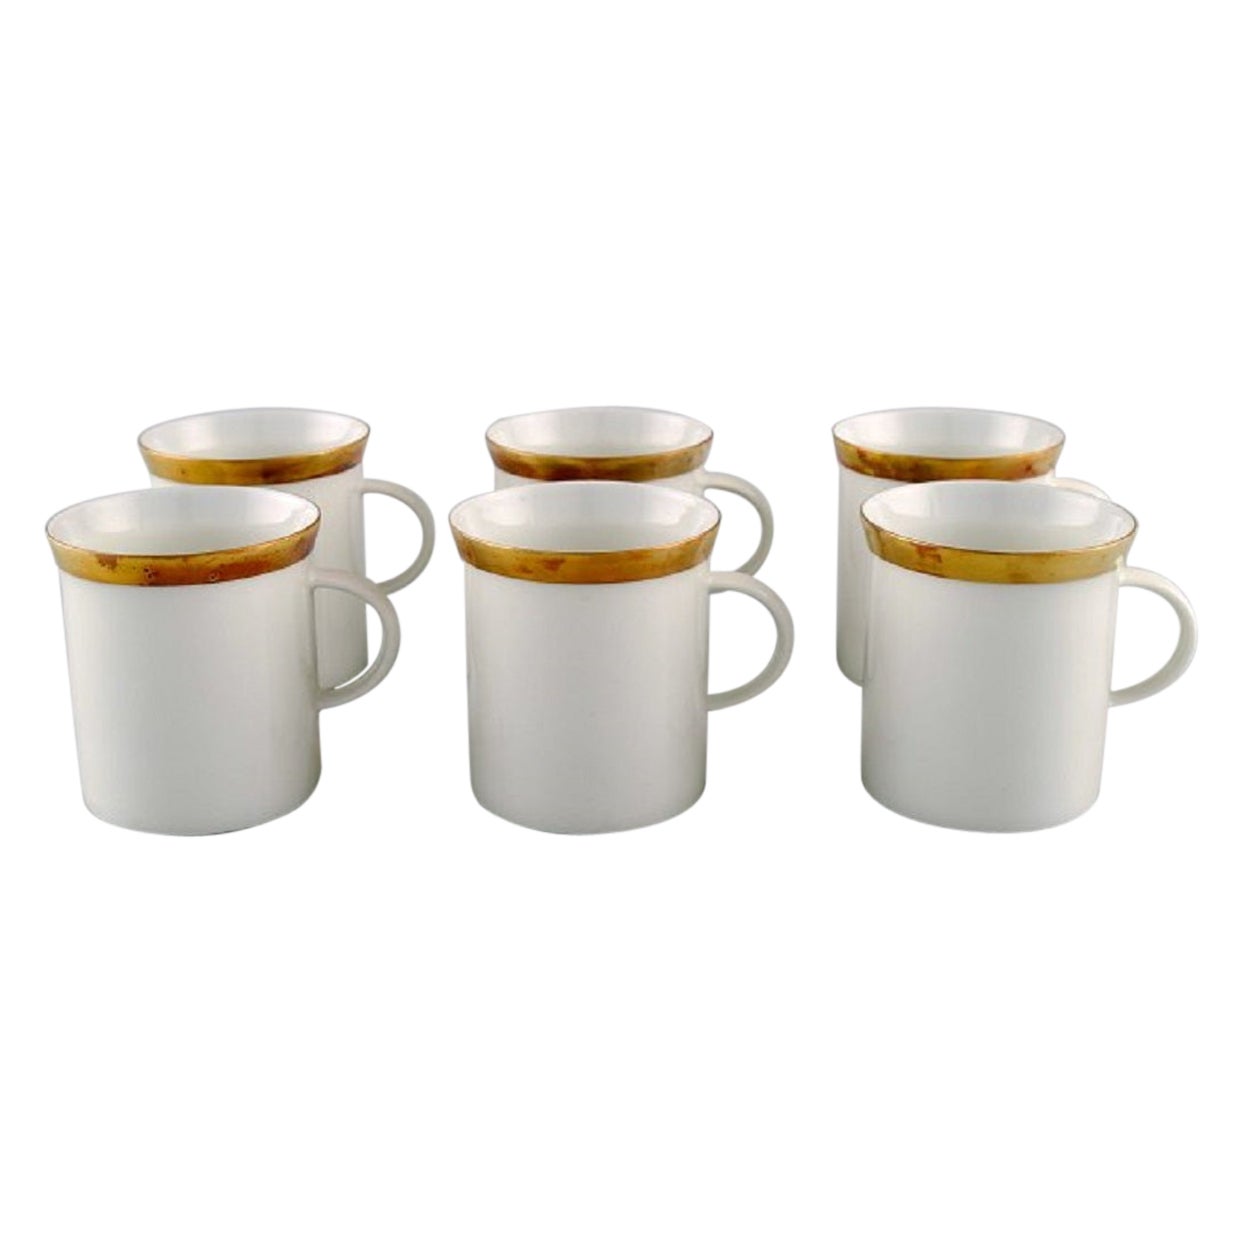 Six Rosenthal Berlin Coffee Cups in Porcelain with Gold Edge, Mid-20th C. For Sale